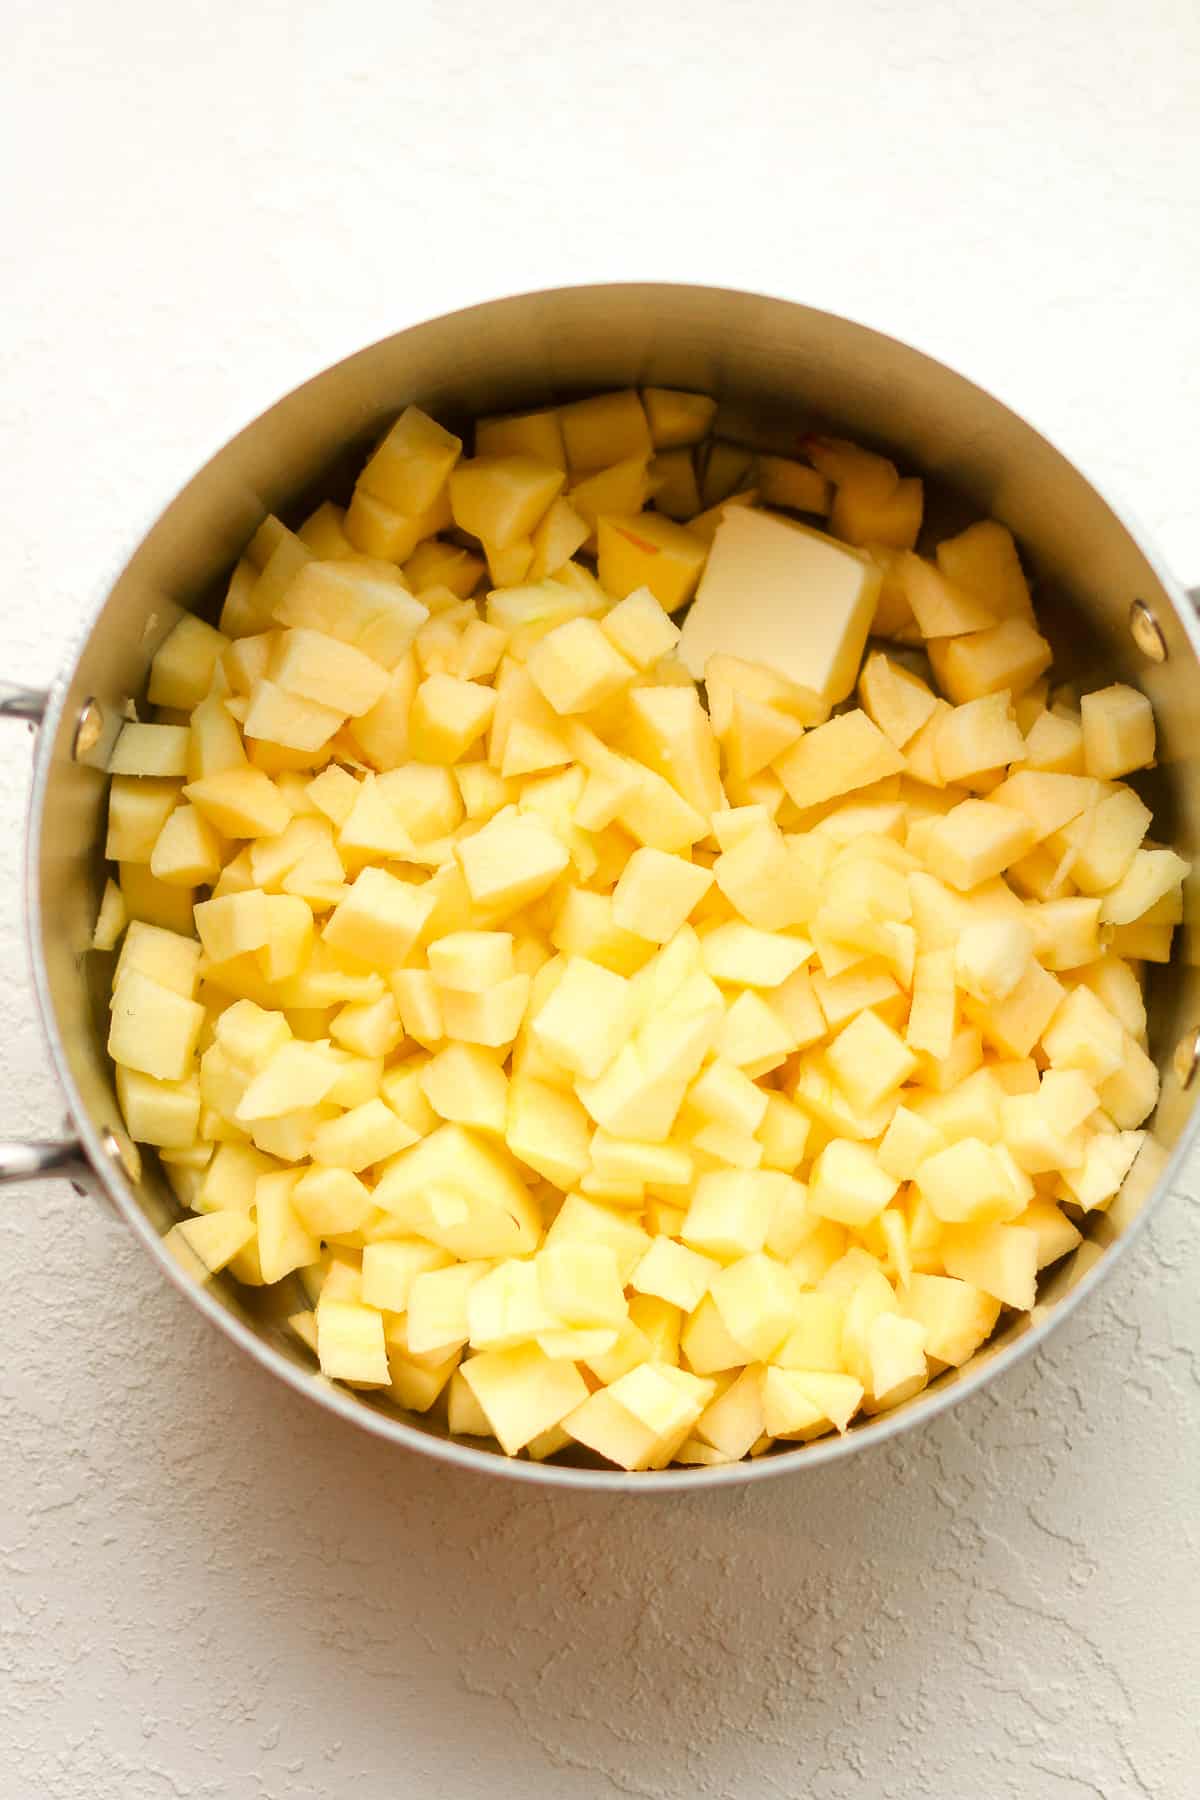 The diced apples in a pan with a tablespoon of butter.